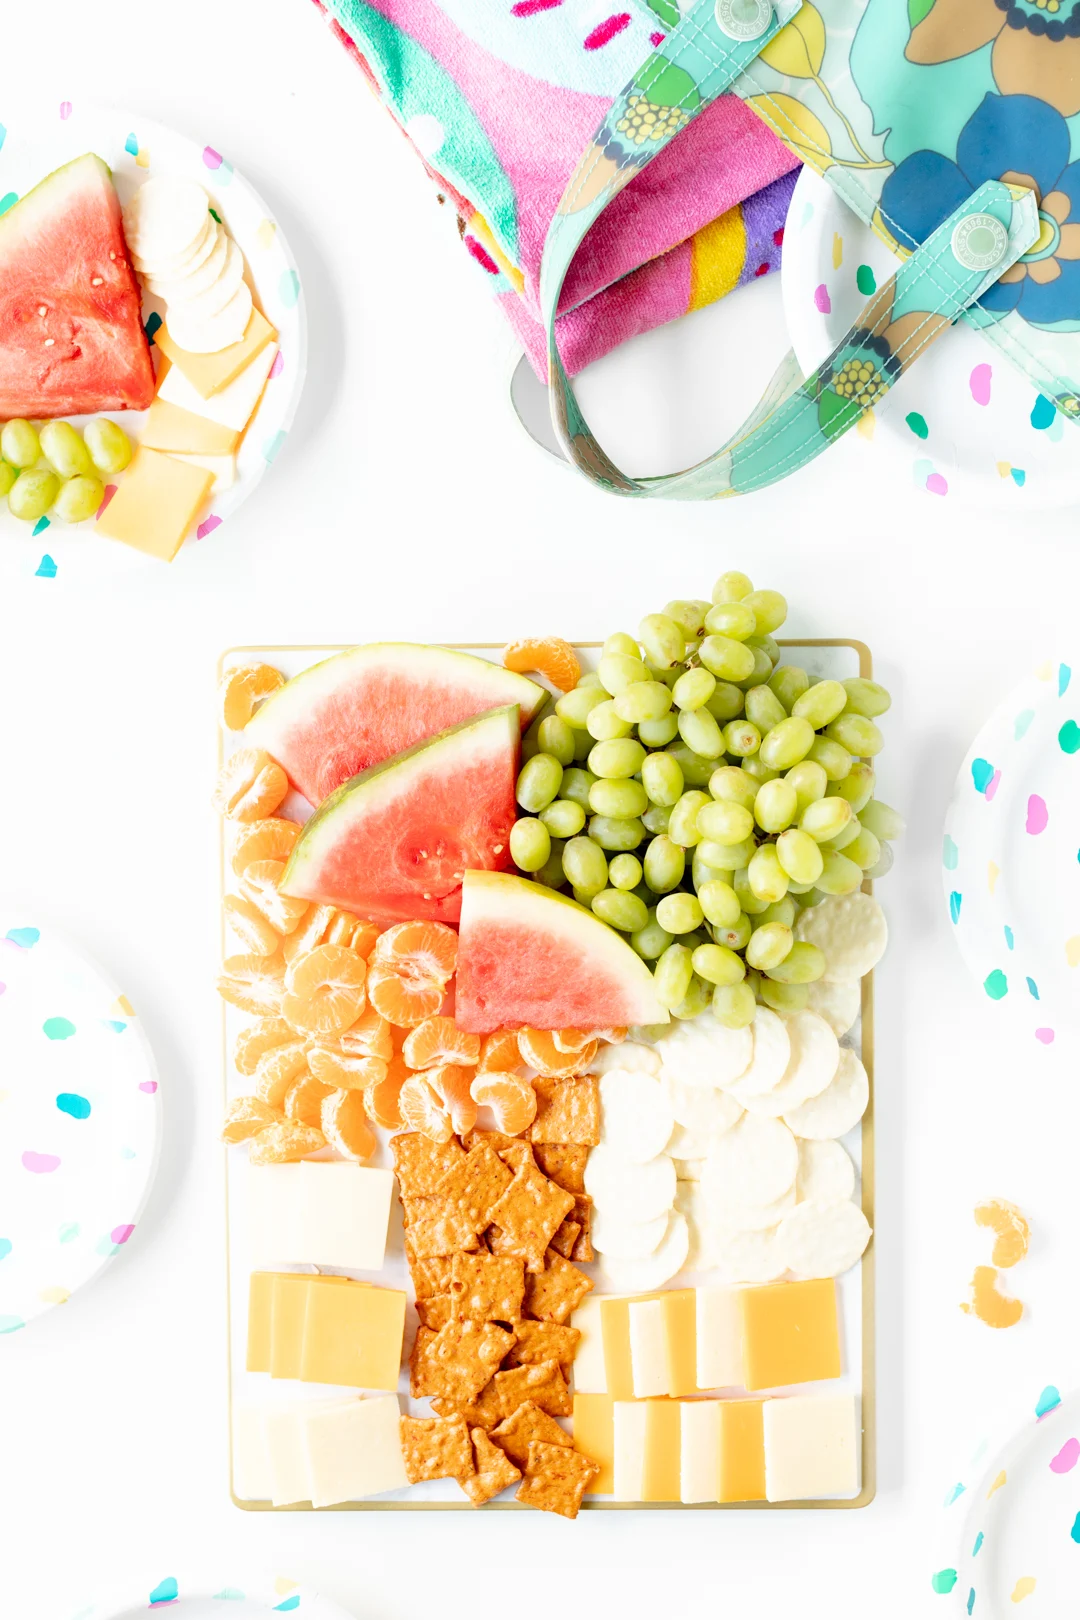 watermelon, grapes, mandarins, cheese and crackers on a tray